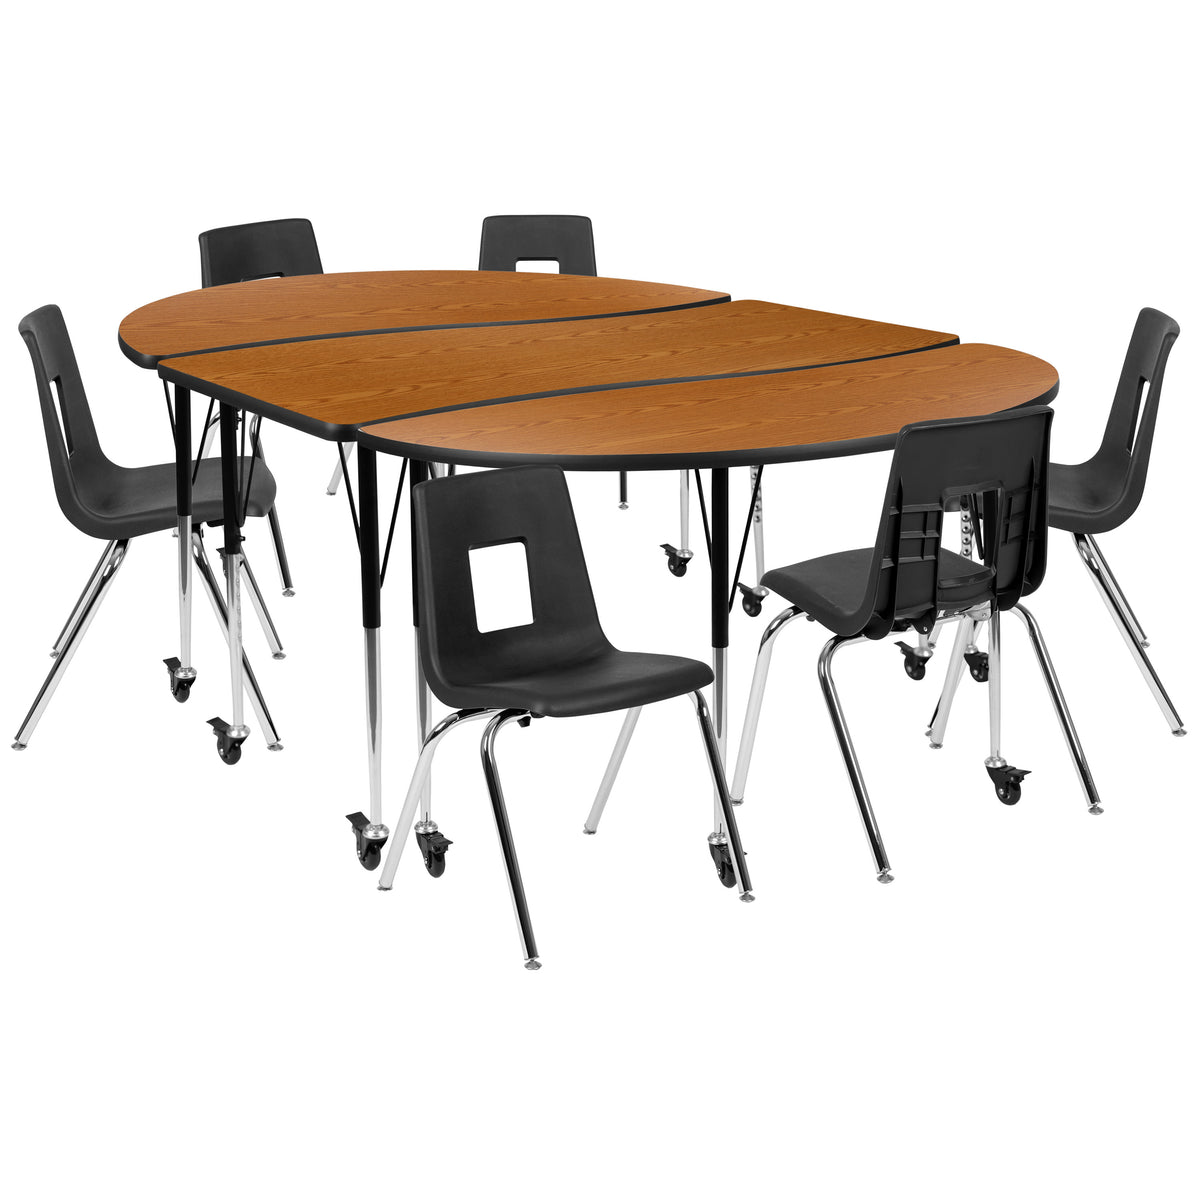 Oak |#| Mobile 86inch Oval Wave Activity Table Set-18inch Student Stack Chairs, Oak/Black